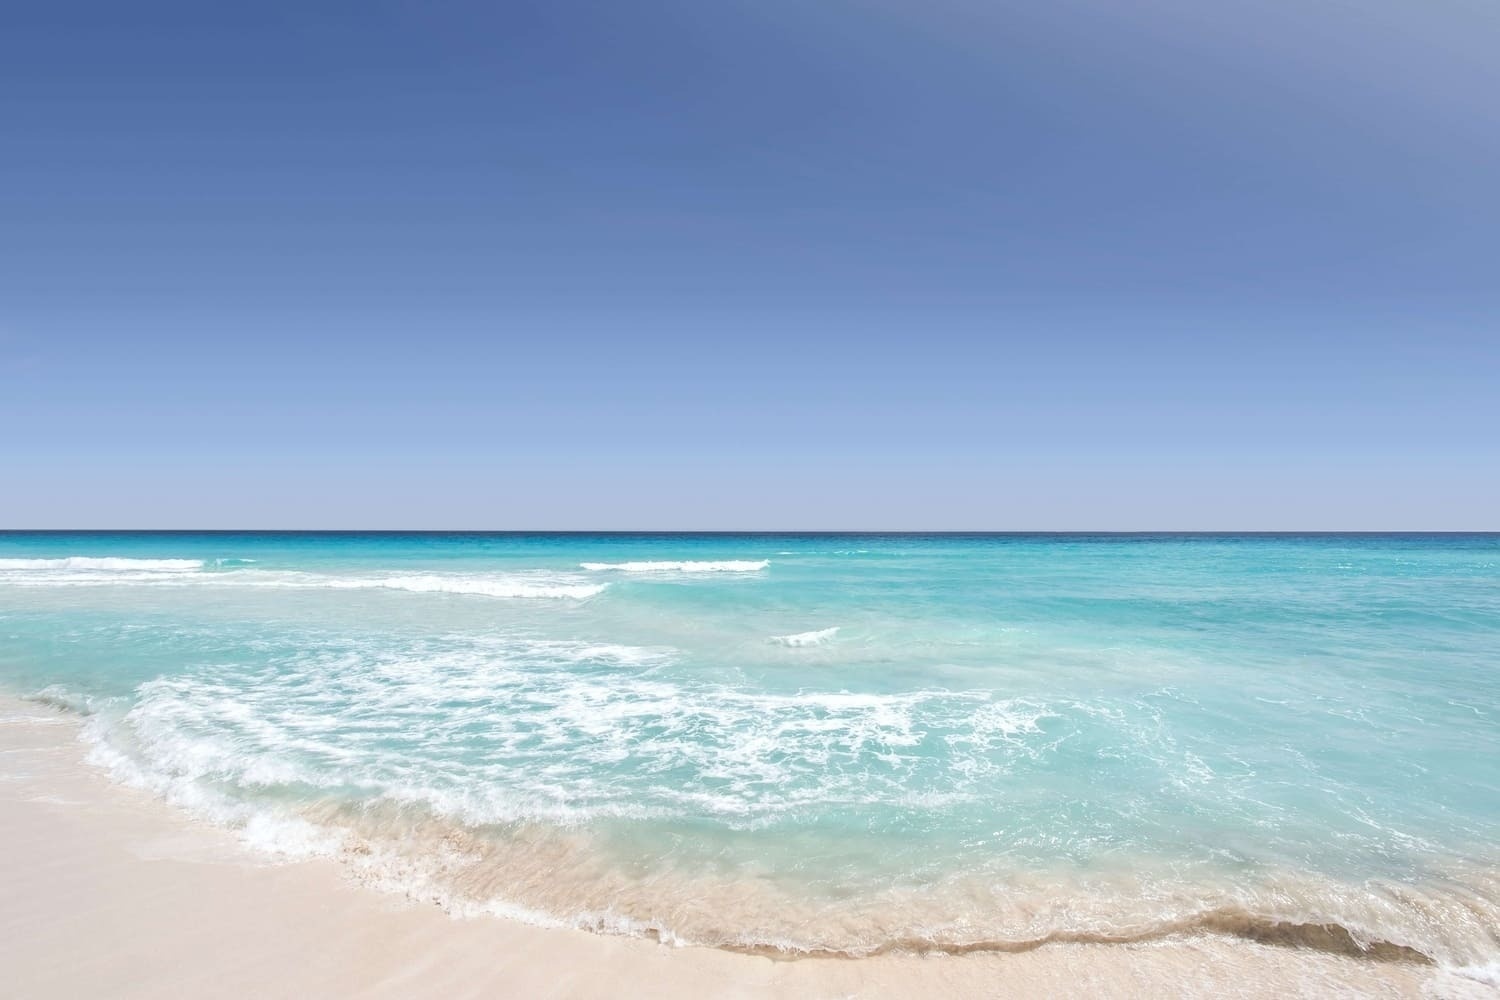 Do you want to know which are the 5 best beaches in Cancun?